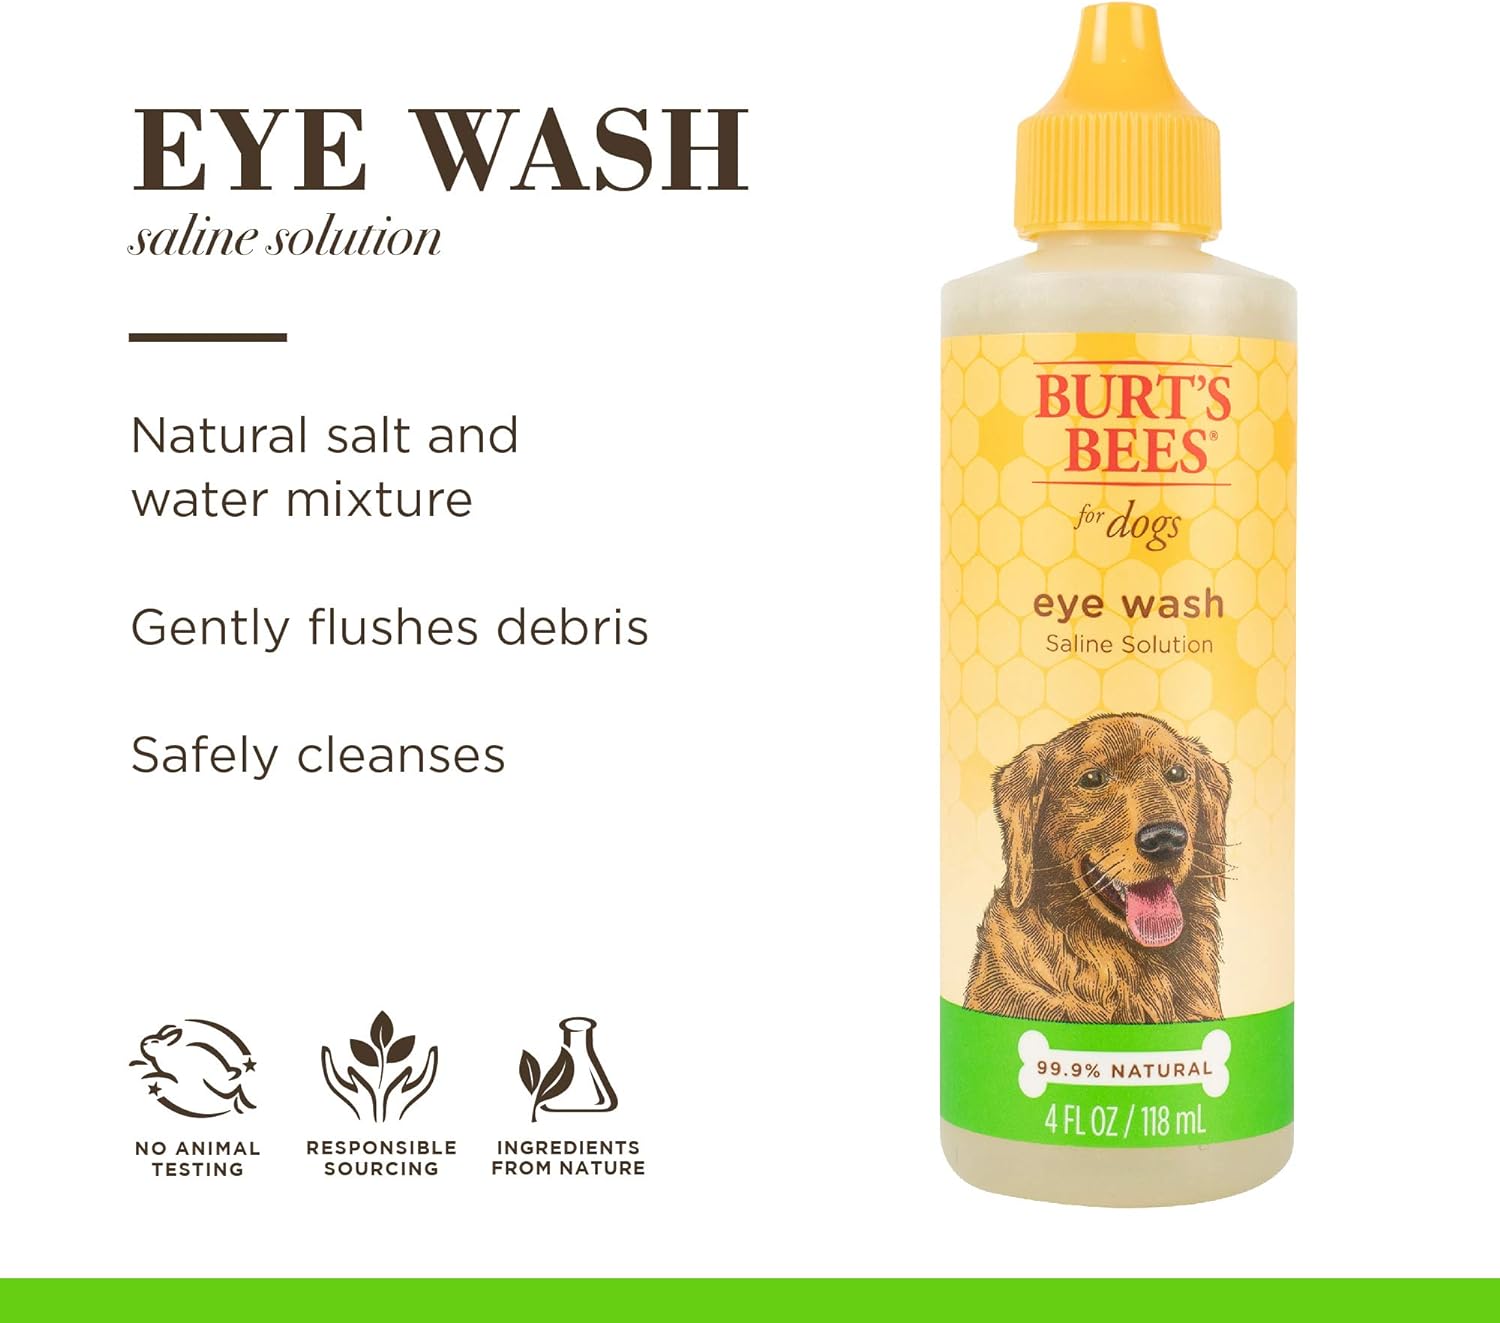 Burt's Bees for Pets Natural Eye Wash with Saline Solution | Eye Wash Drops for All Dogs and Puppies | Dog Eye Cleaner Eye Wash | Cruelty Free, Made in USA, 4 Oz -2 Pack : Pet Supplies